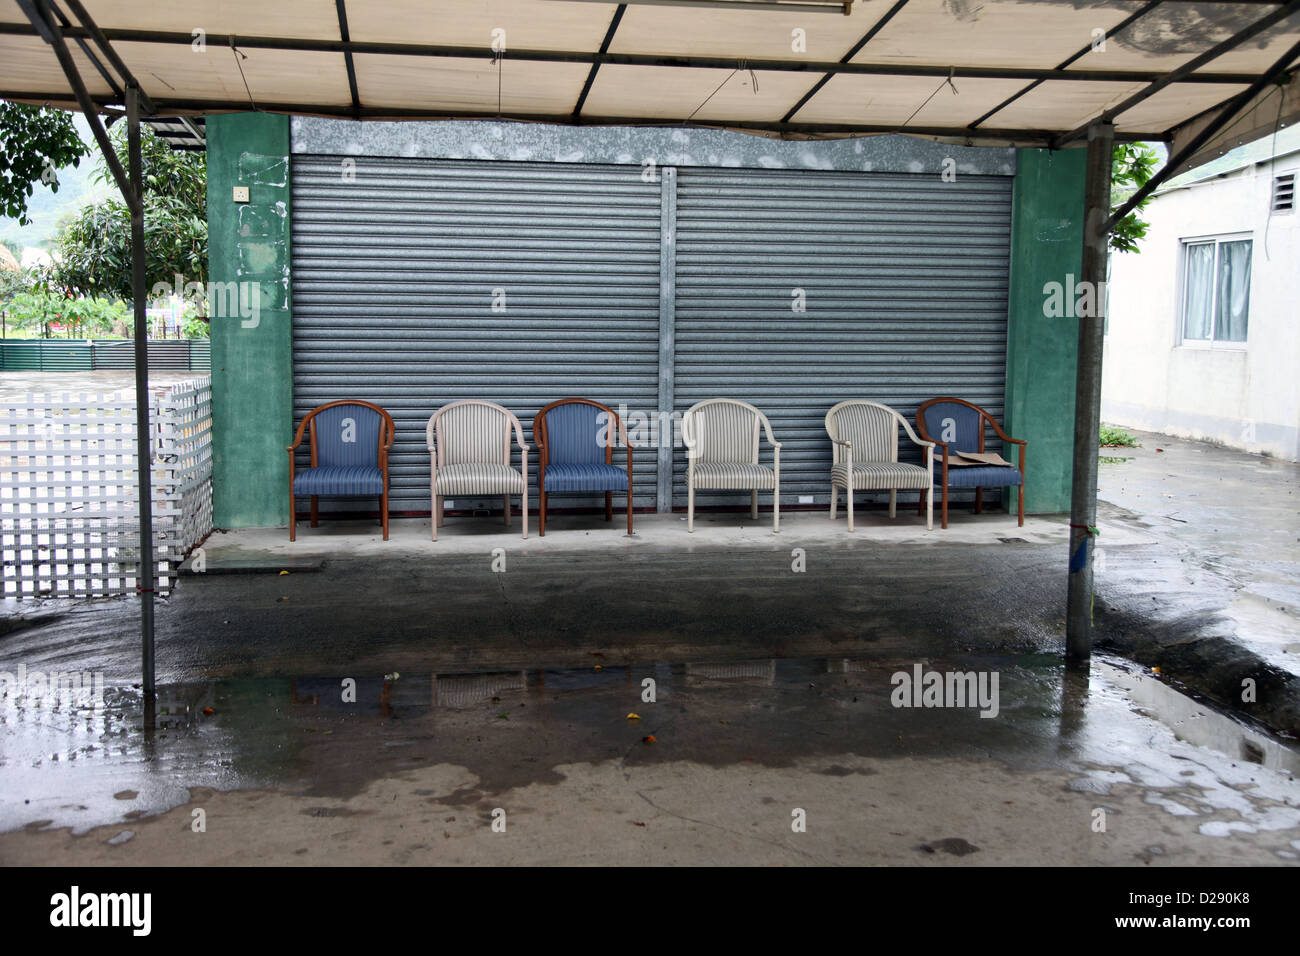 It's a photo of 6 chairs or seats that stand side by side in front of a closed shop in Hong Kong Stock Photo